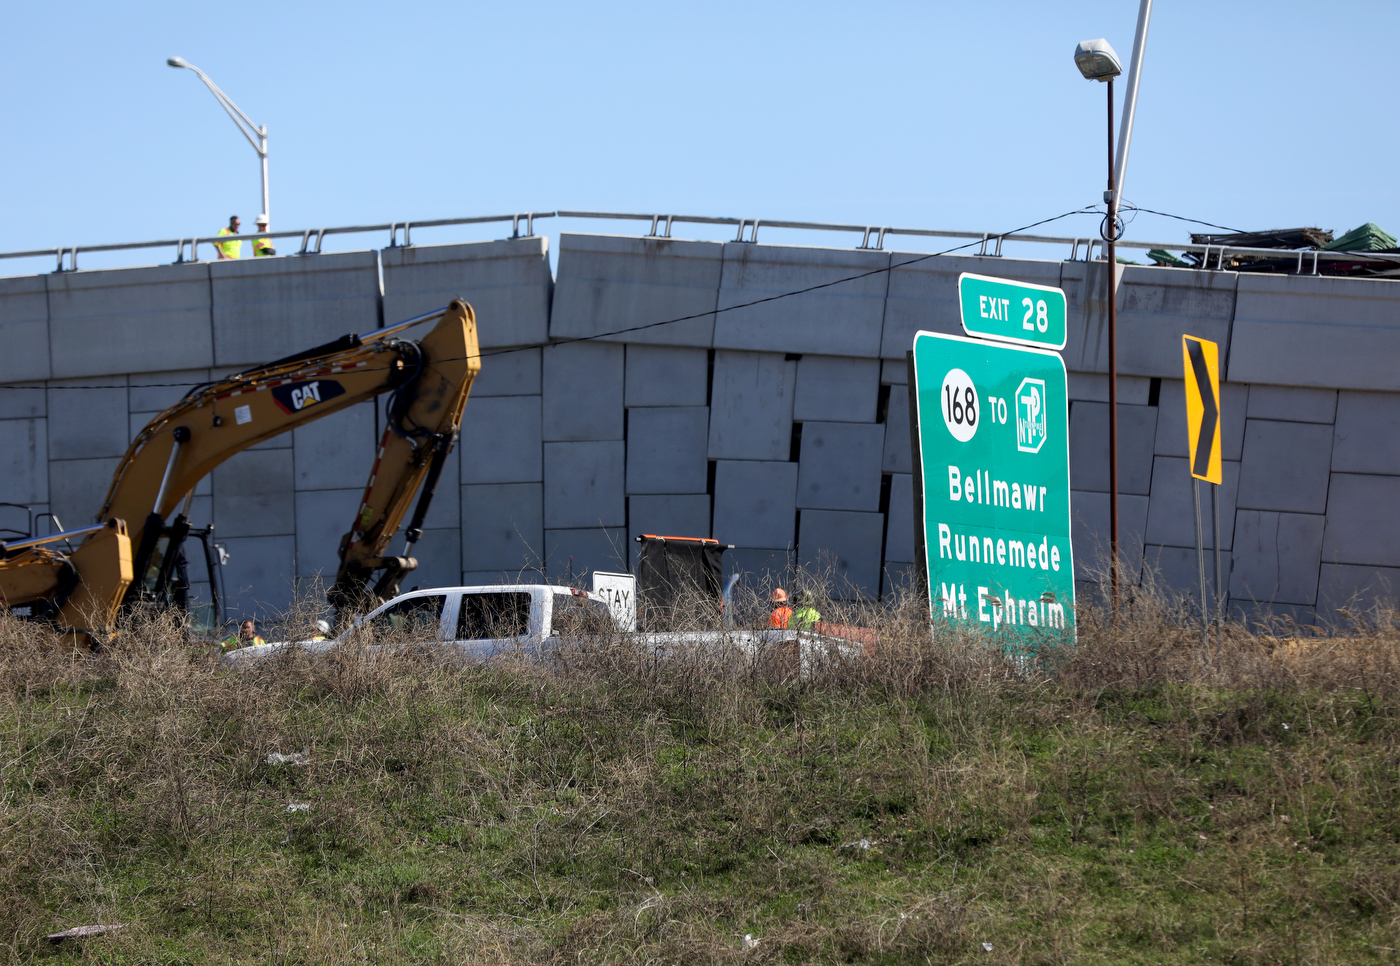 I 295 Project Was 4 Years Behind Schedule Before Retaining Wall Collapsed Dot Says Nj Com